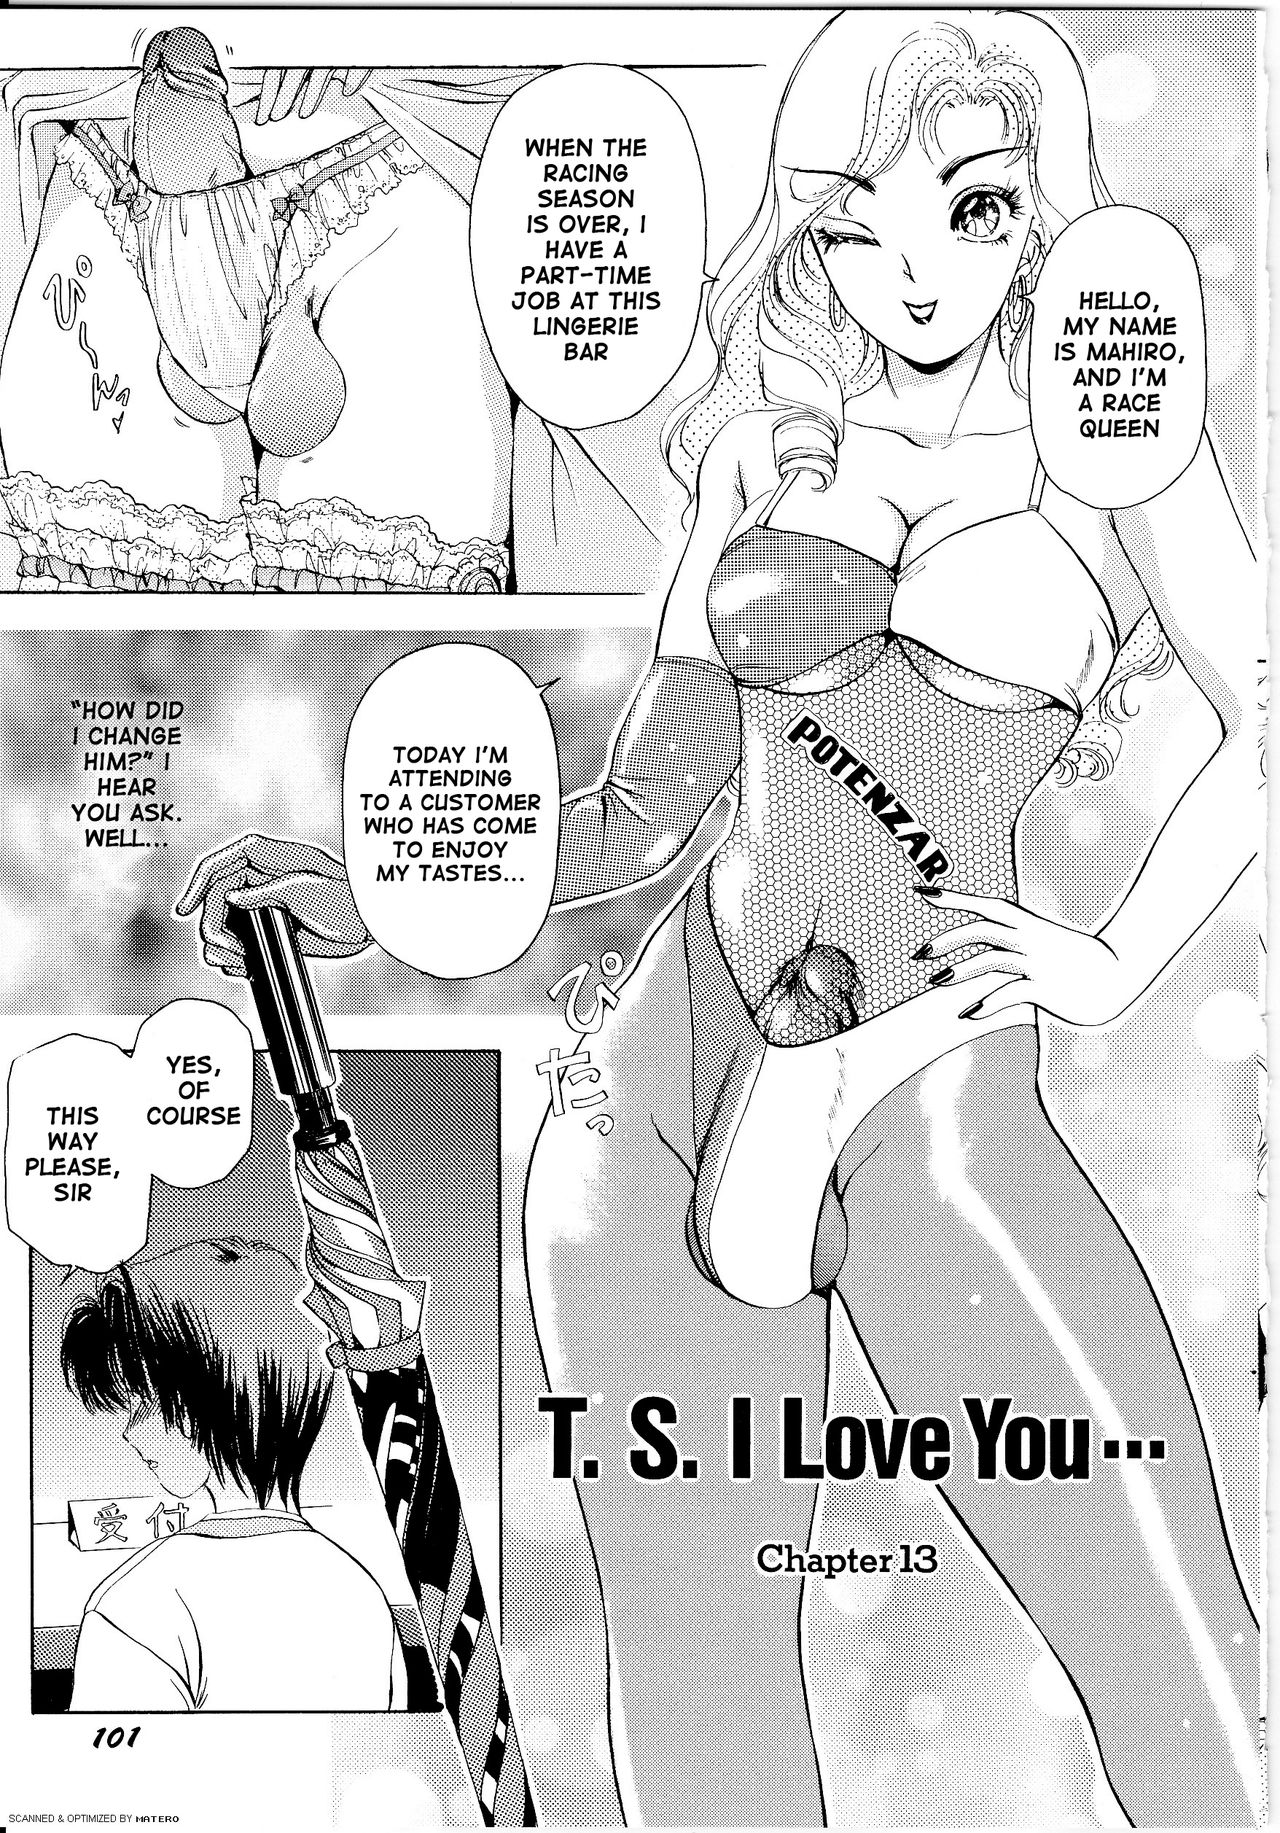 [The Amanoja9] T.S. I LOVE YOU... 1 Chapter 13 [English] 